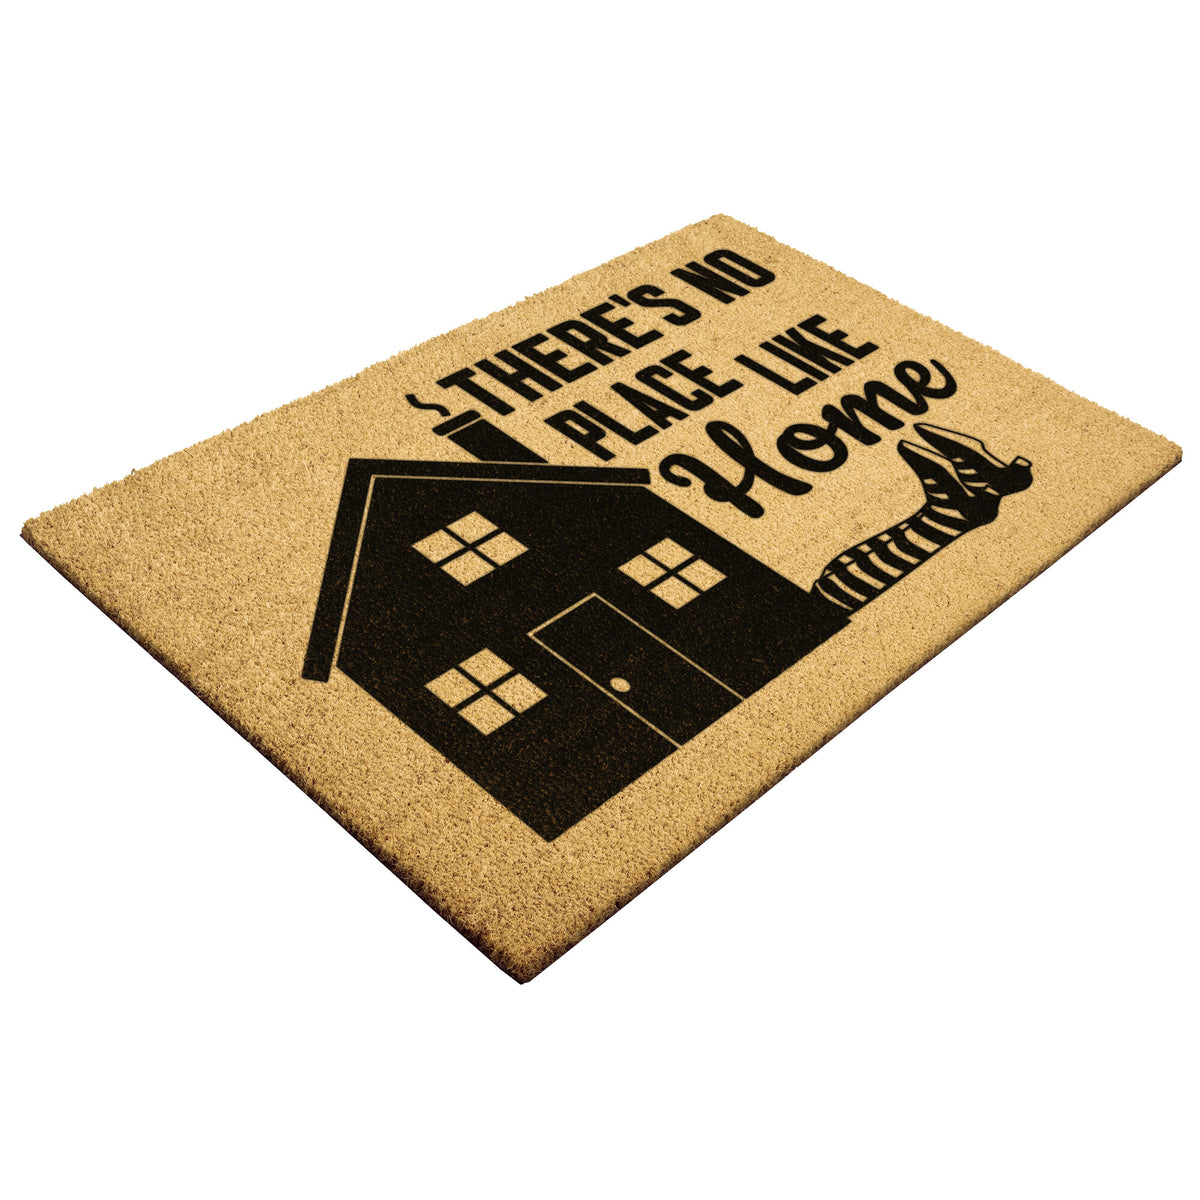 There's No Place Like Home Doormat